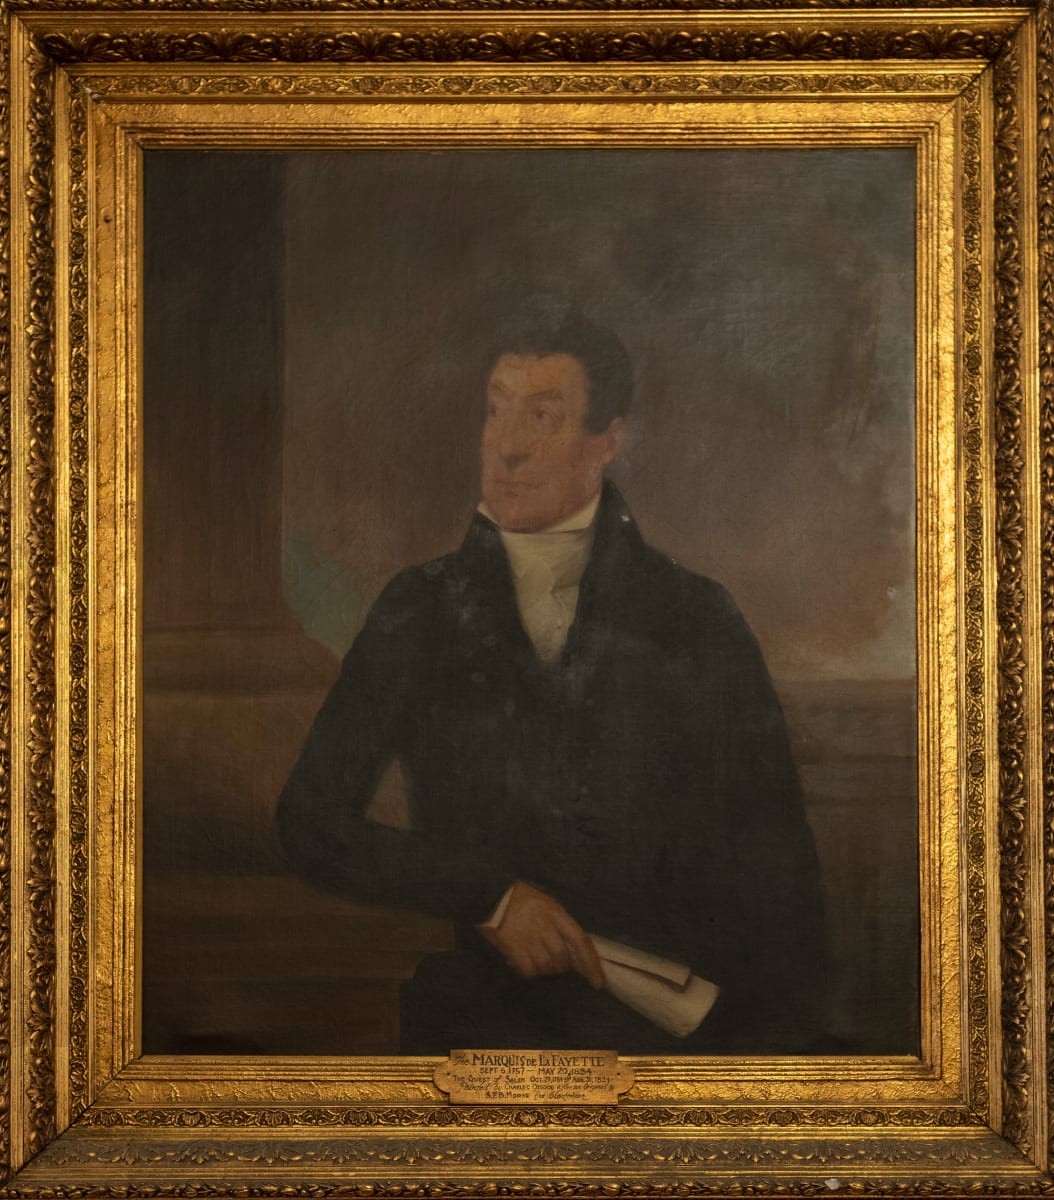 Portrait of the Marquis de Lafayette by Charles Osgood 